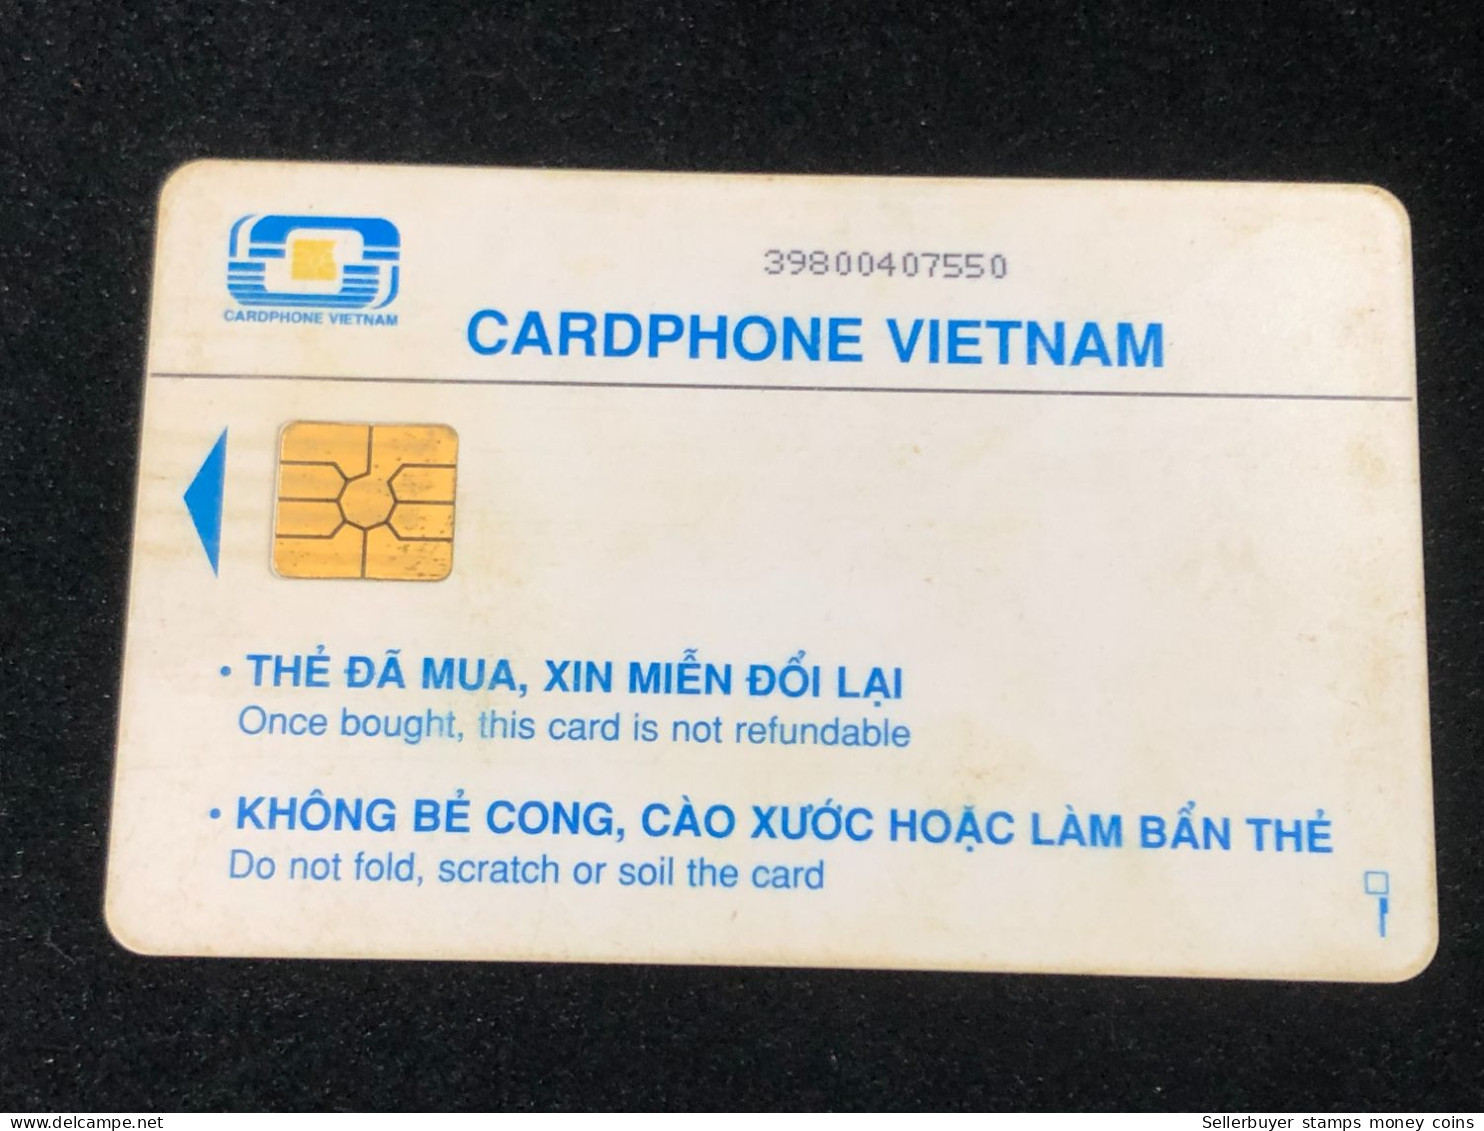 Vietnam This Is A Vietnamese Cardphone Card From 2001 And 2005(107- 50 000dong)-1pcs - Viêt-Nam